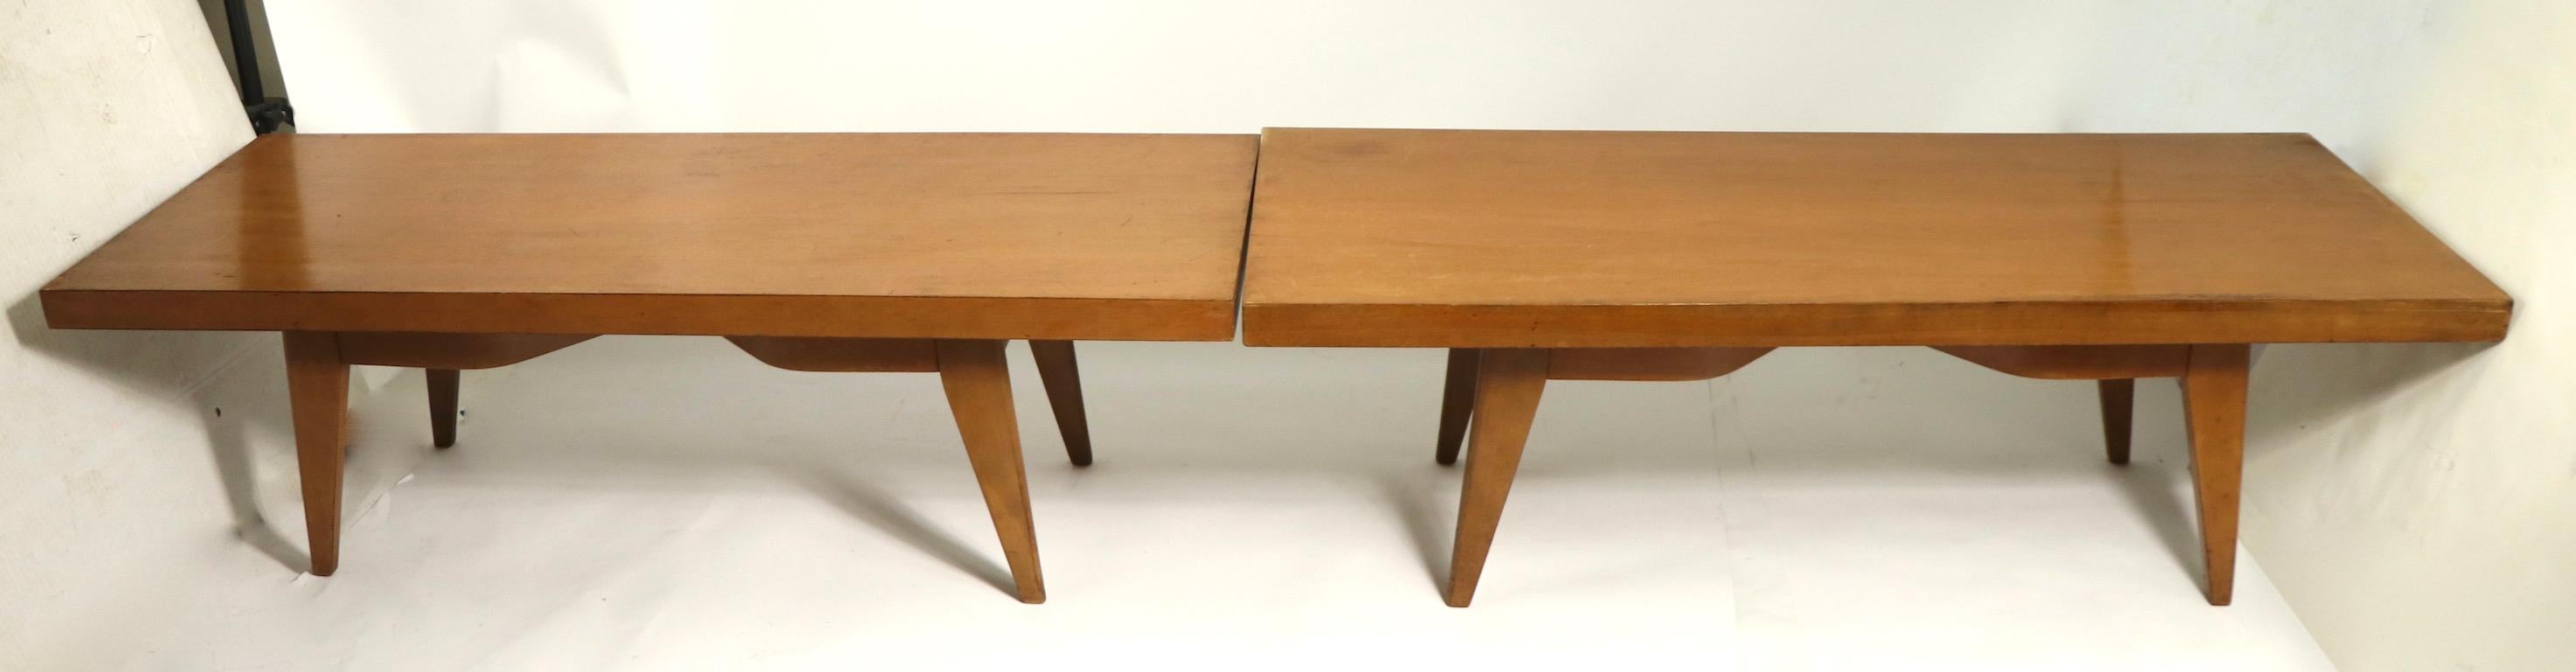 2 Mid Century Coffee Tables attributed to Russel Wright For Sale 3